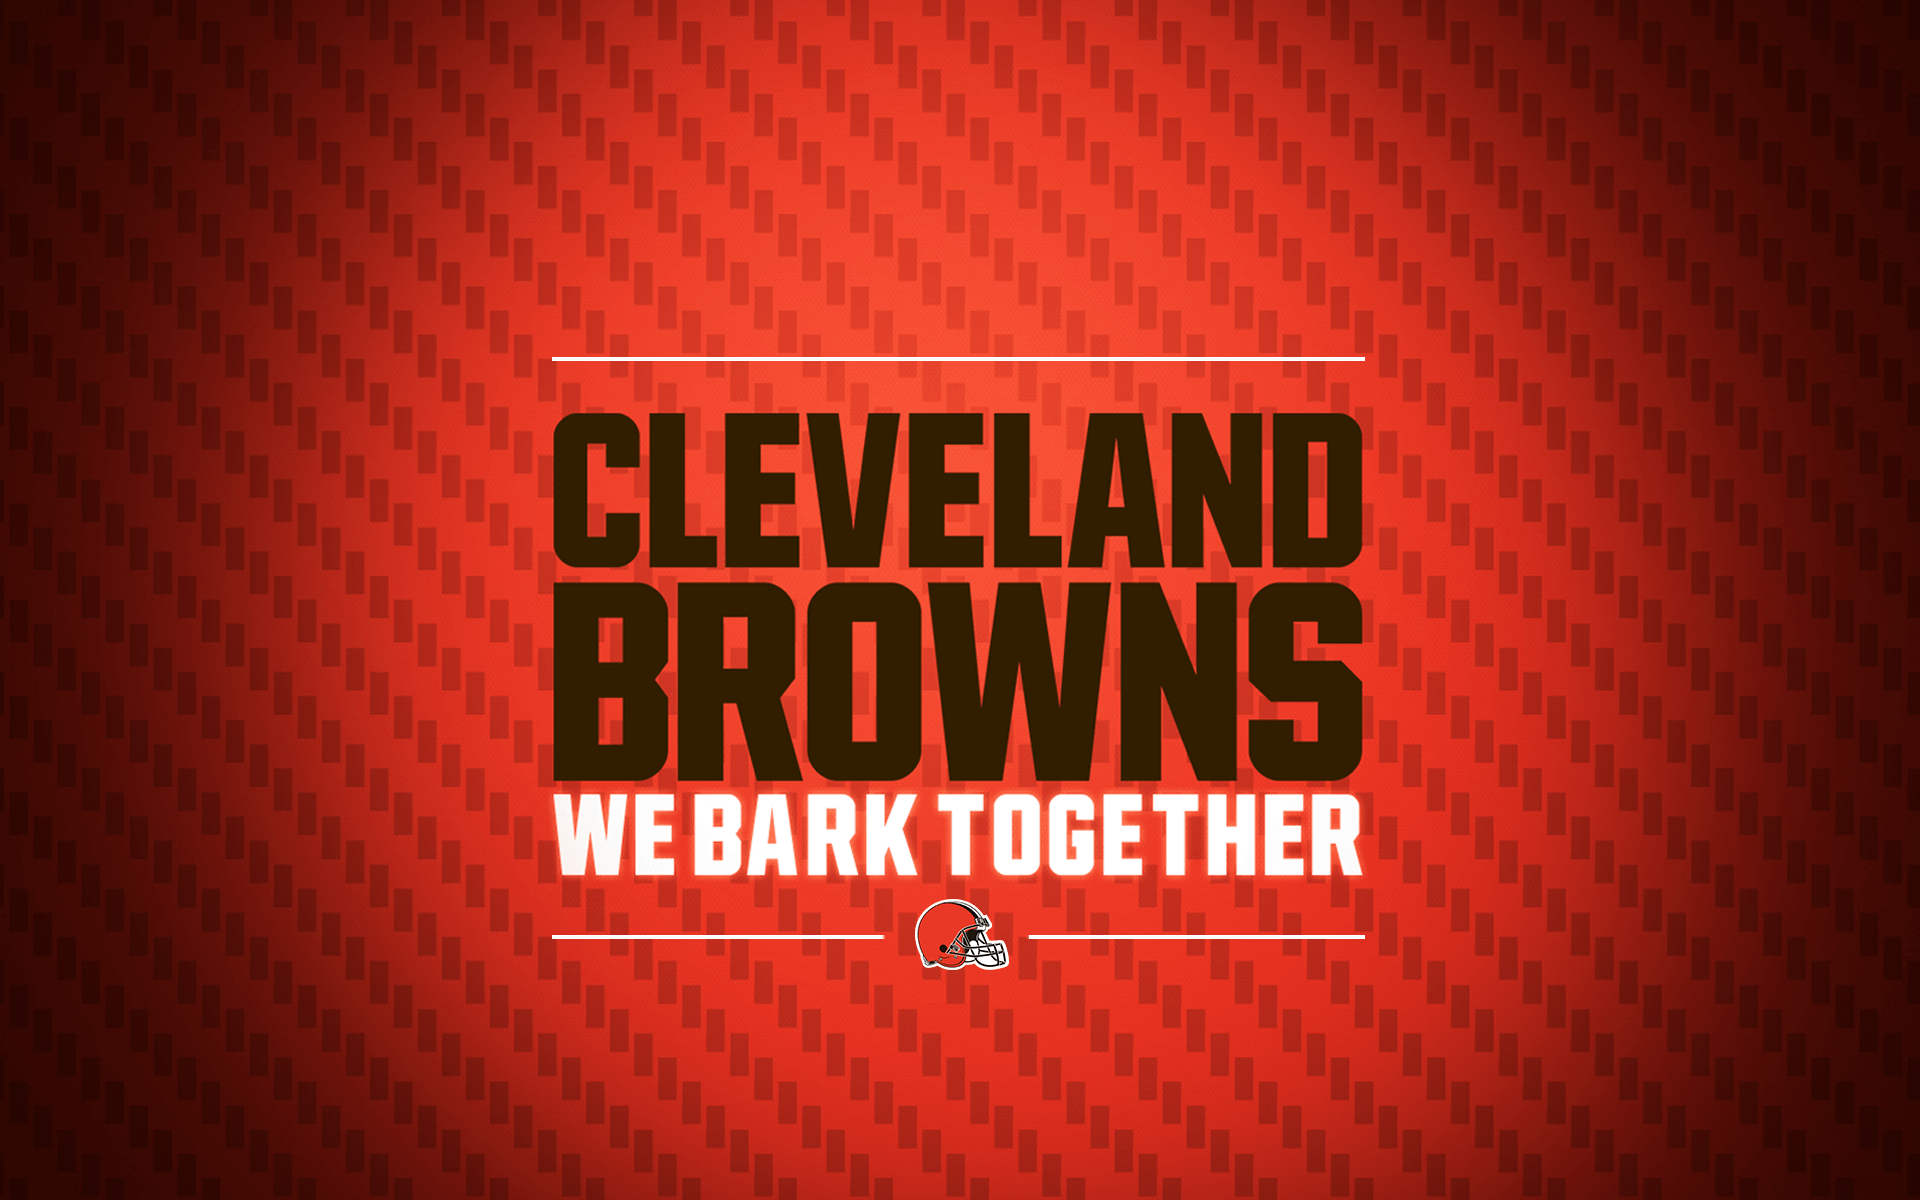 Cleveland Browns 2016 Wallpapers 1920x1200